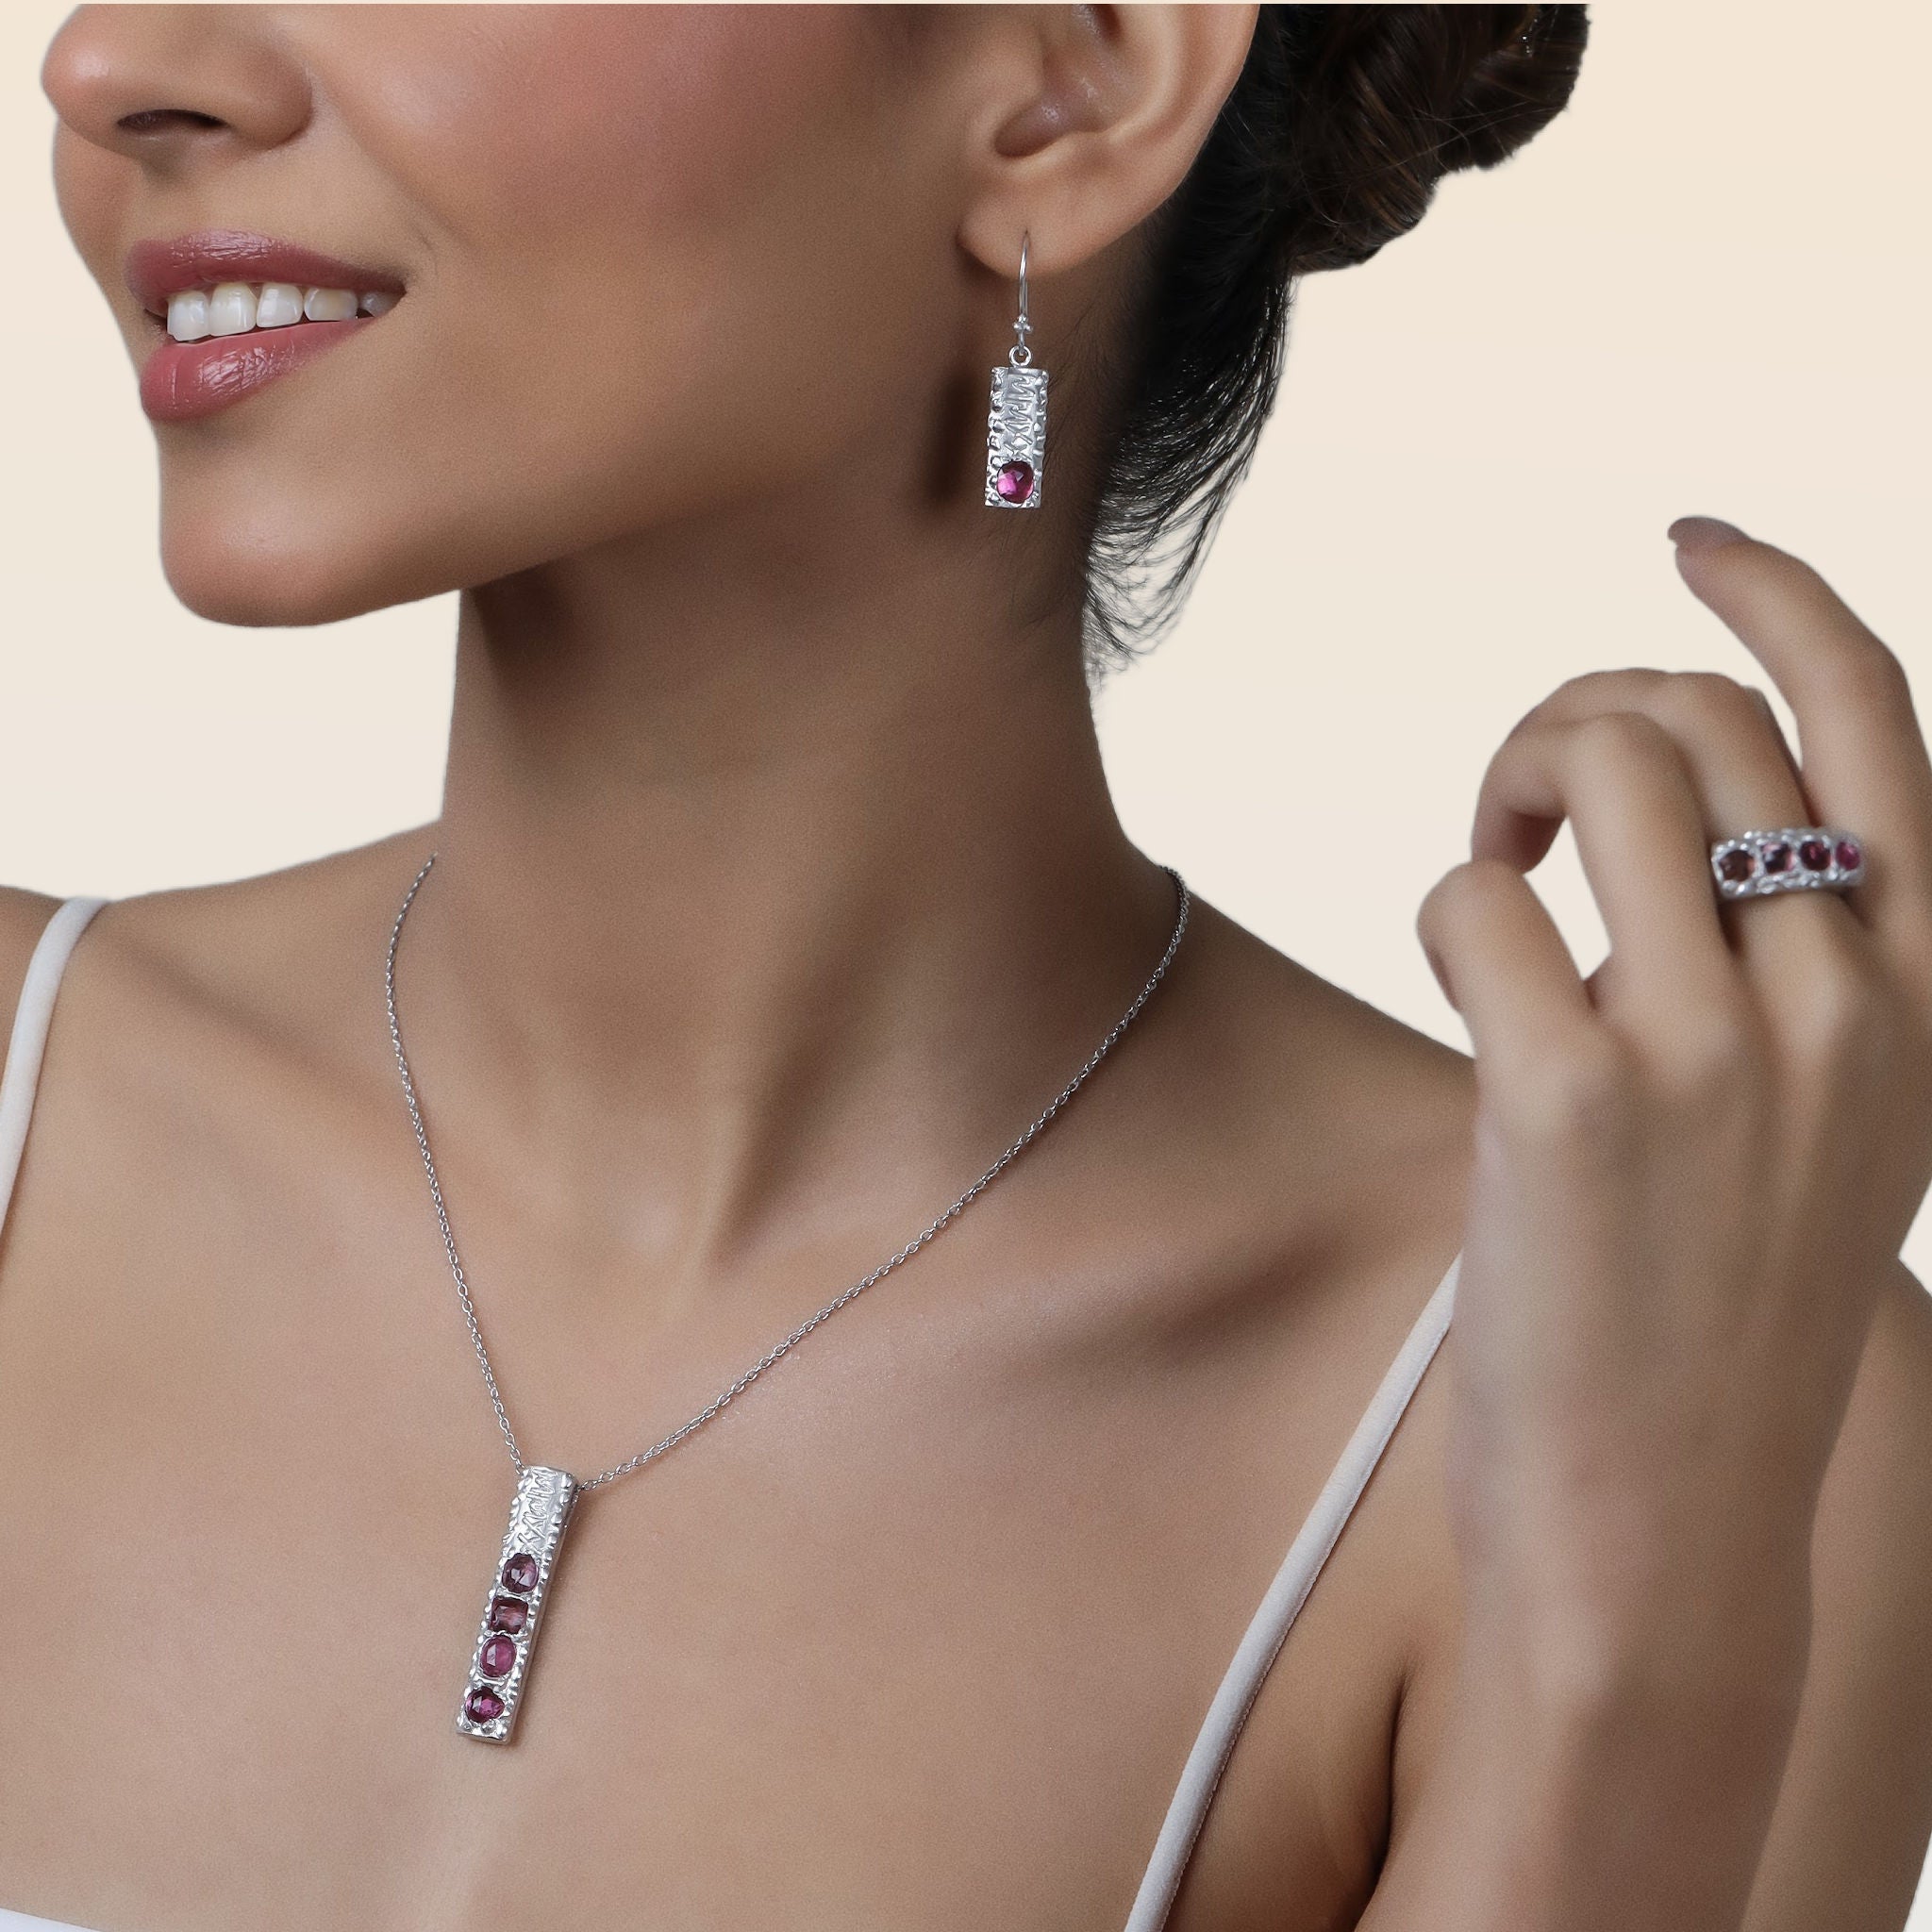 HumanKind Necklace. Pink Tourmaline Ombre. 925 Silver